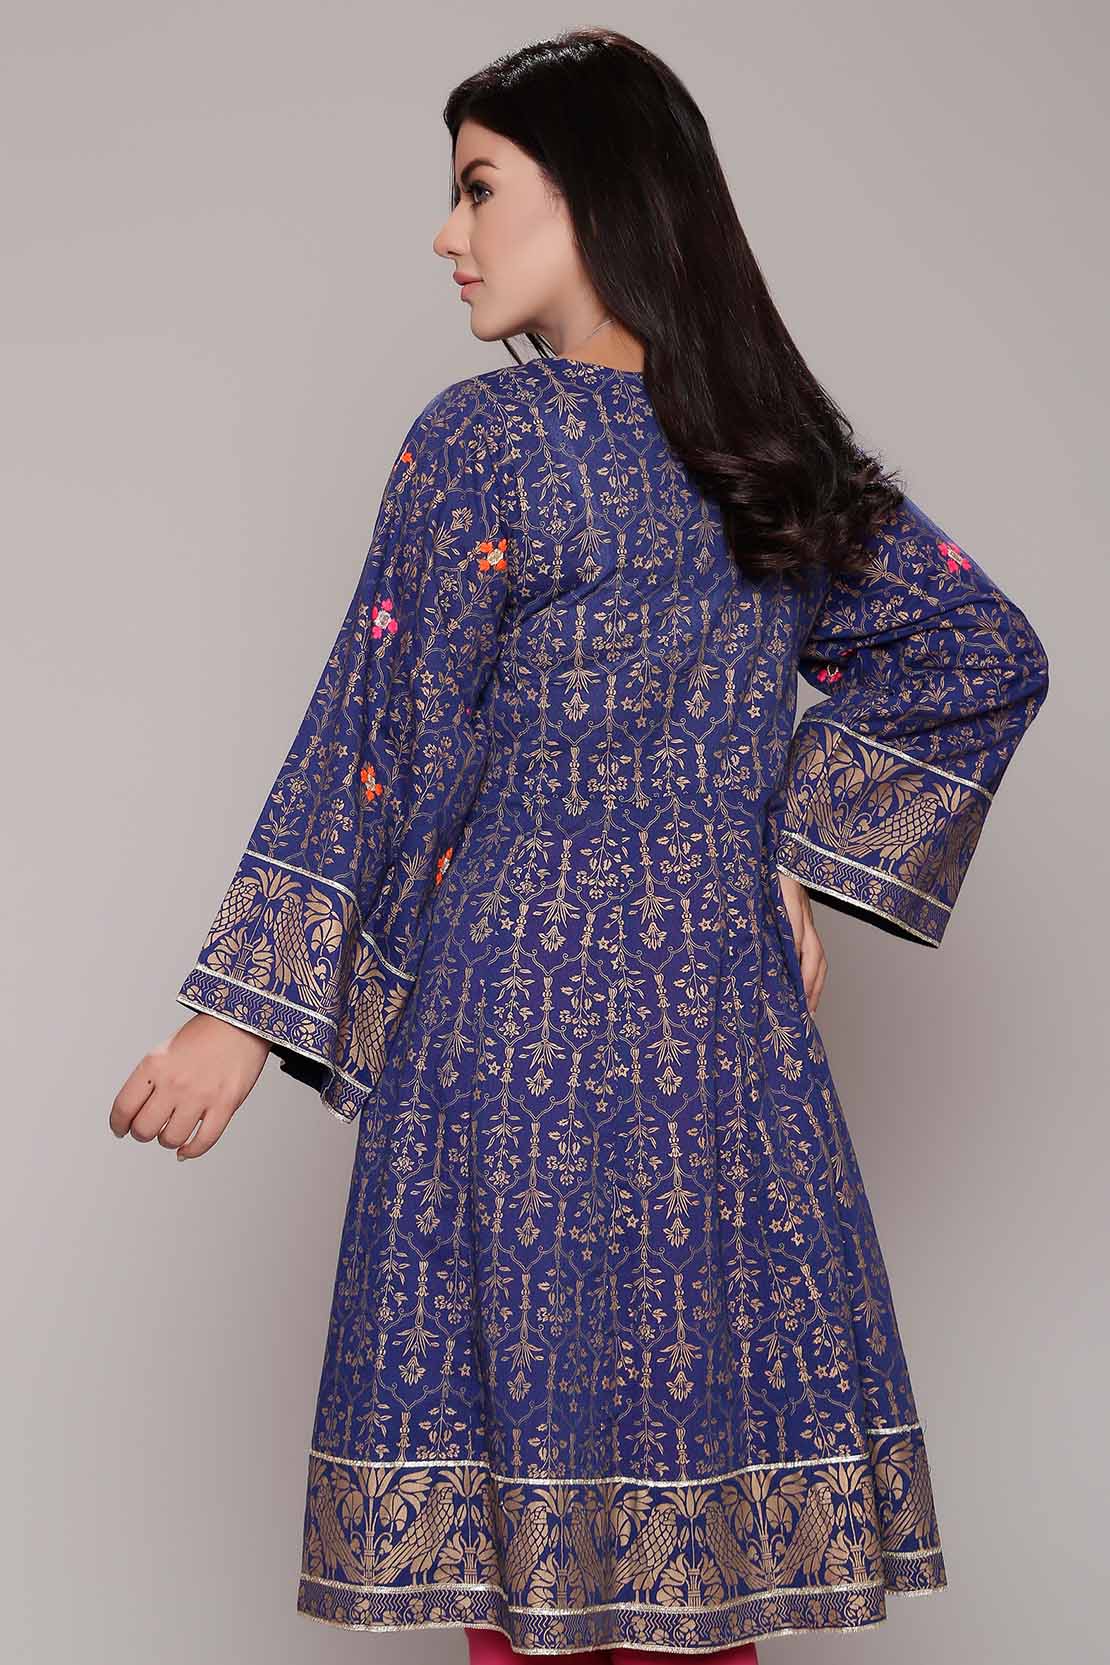 Mughal chatta blue pret wear top by Rang ja pret wear collection 2018